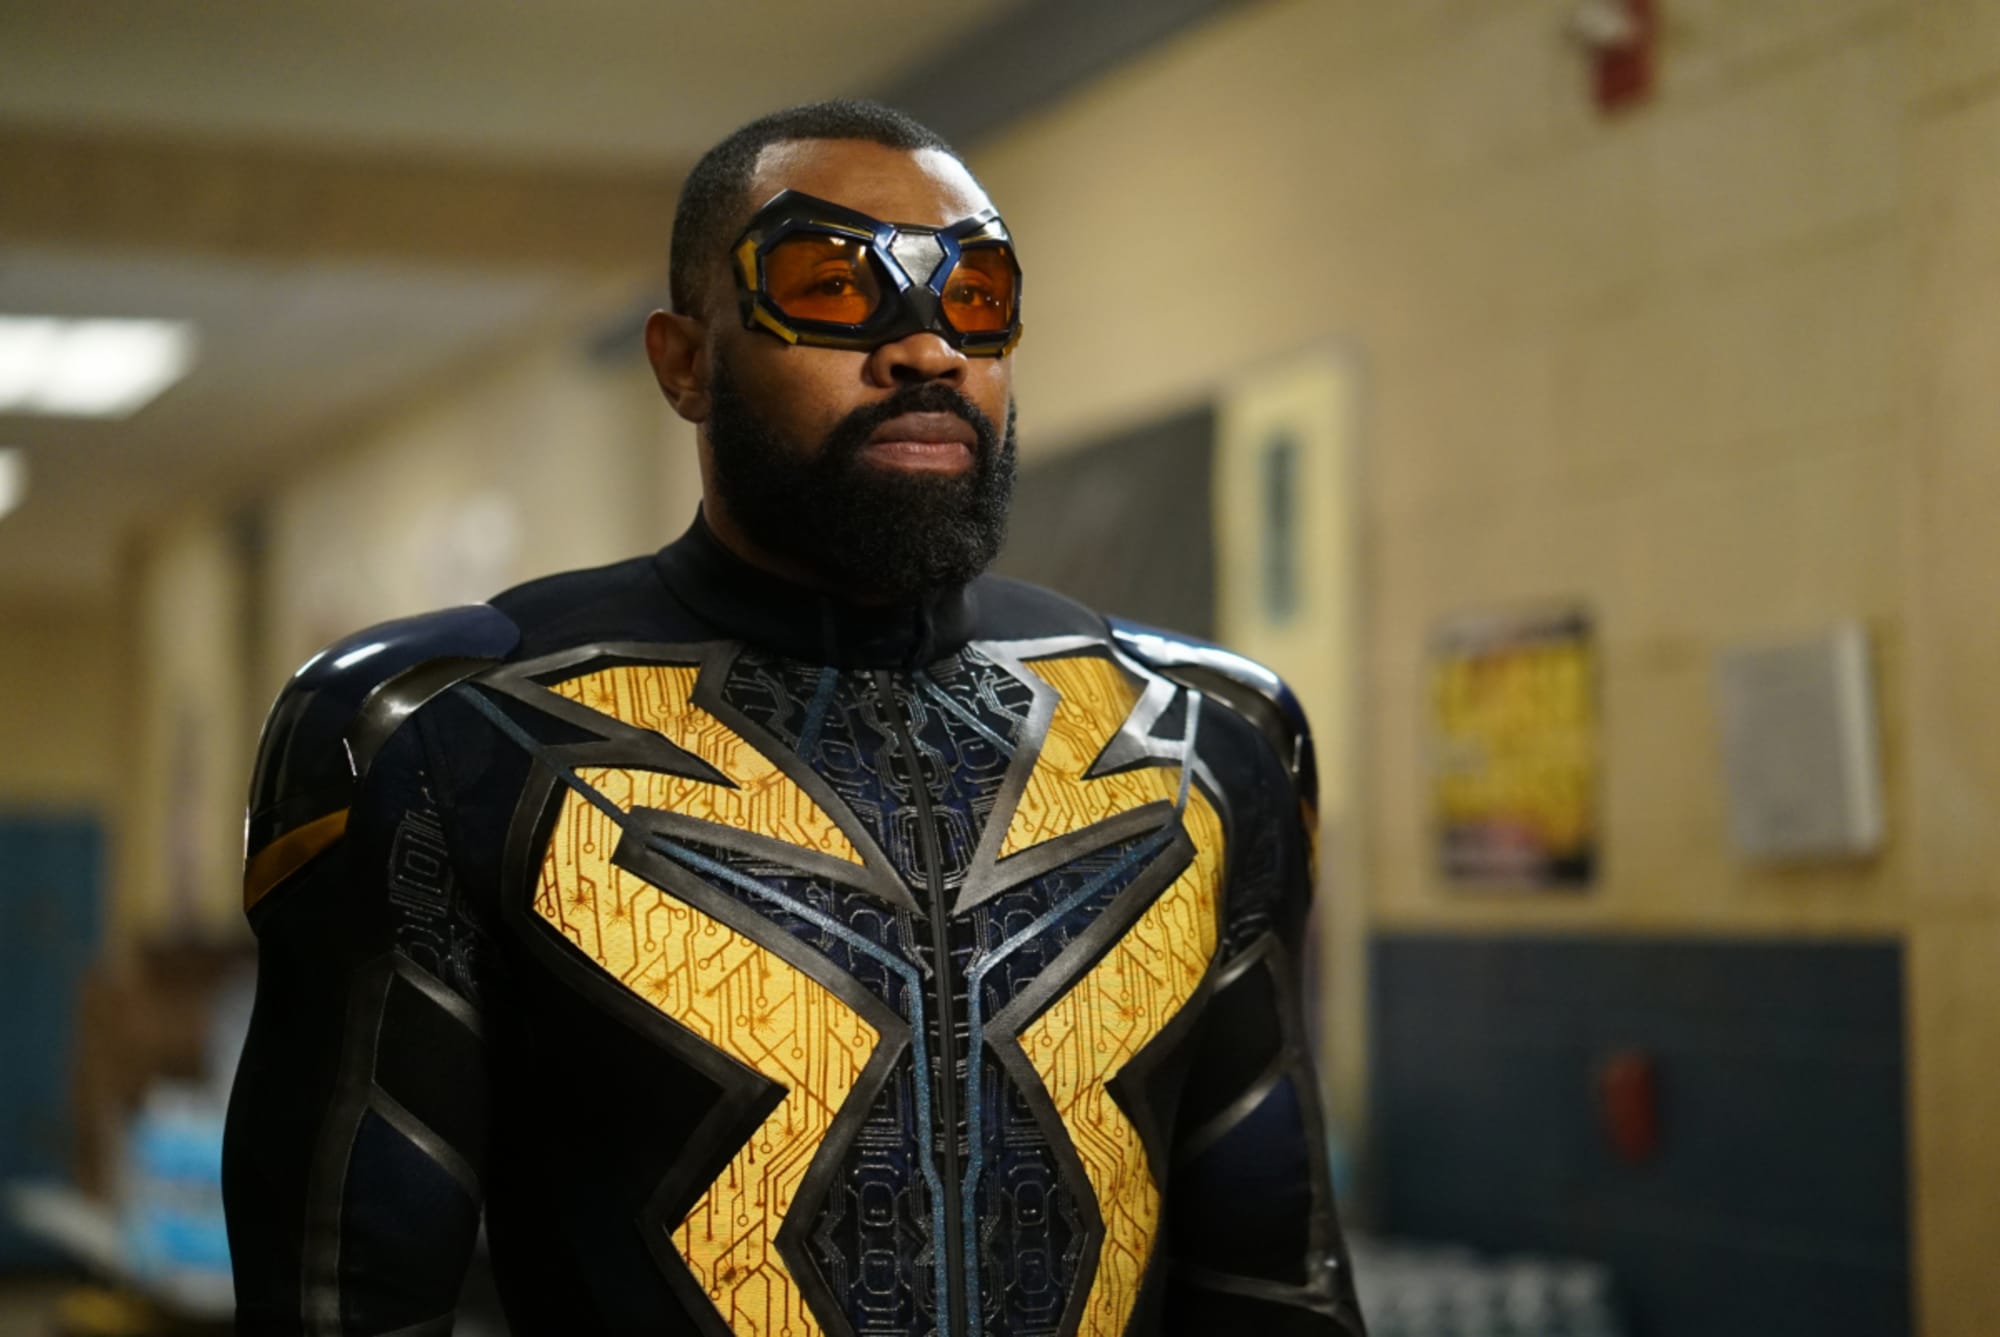 Is Black Lightning new tonight, March 22, 2021, on The CW?